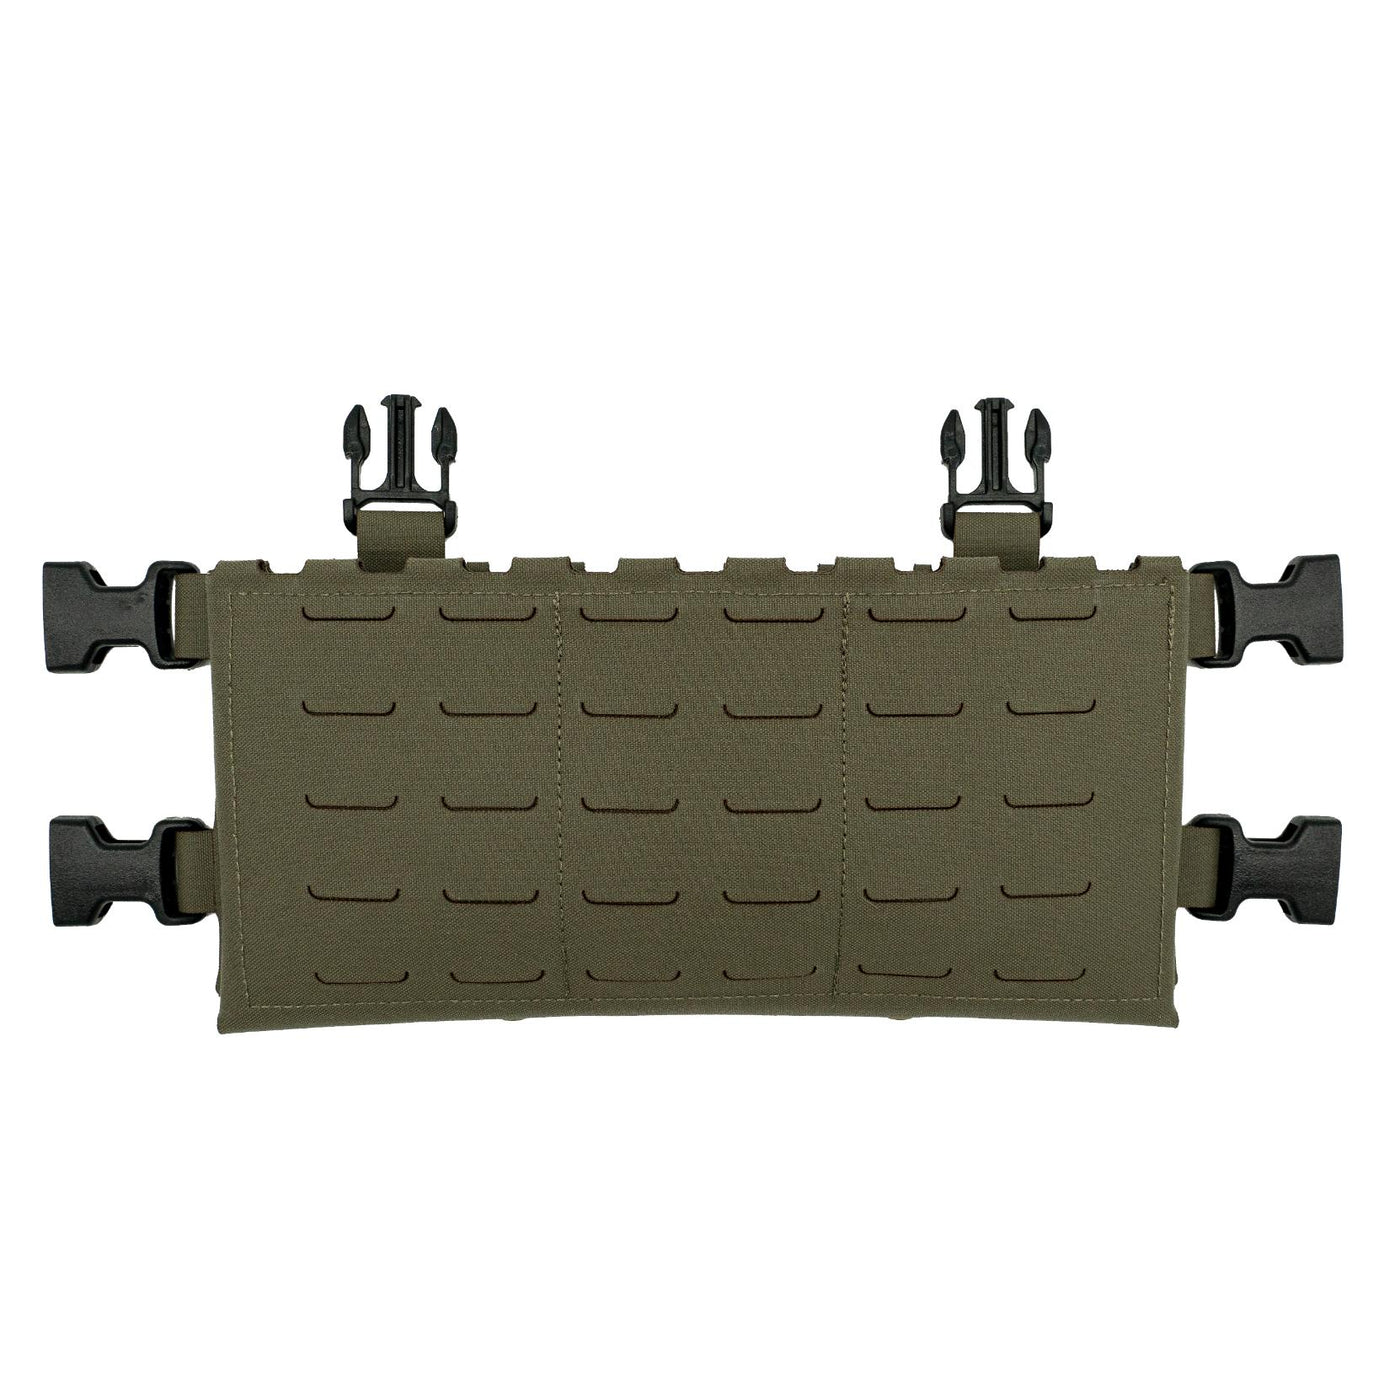 Partisan Chest Rig Base